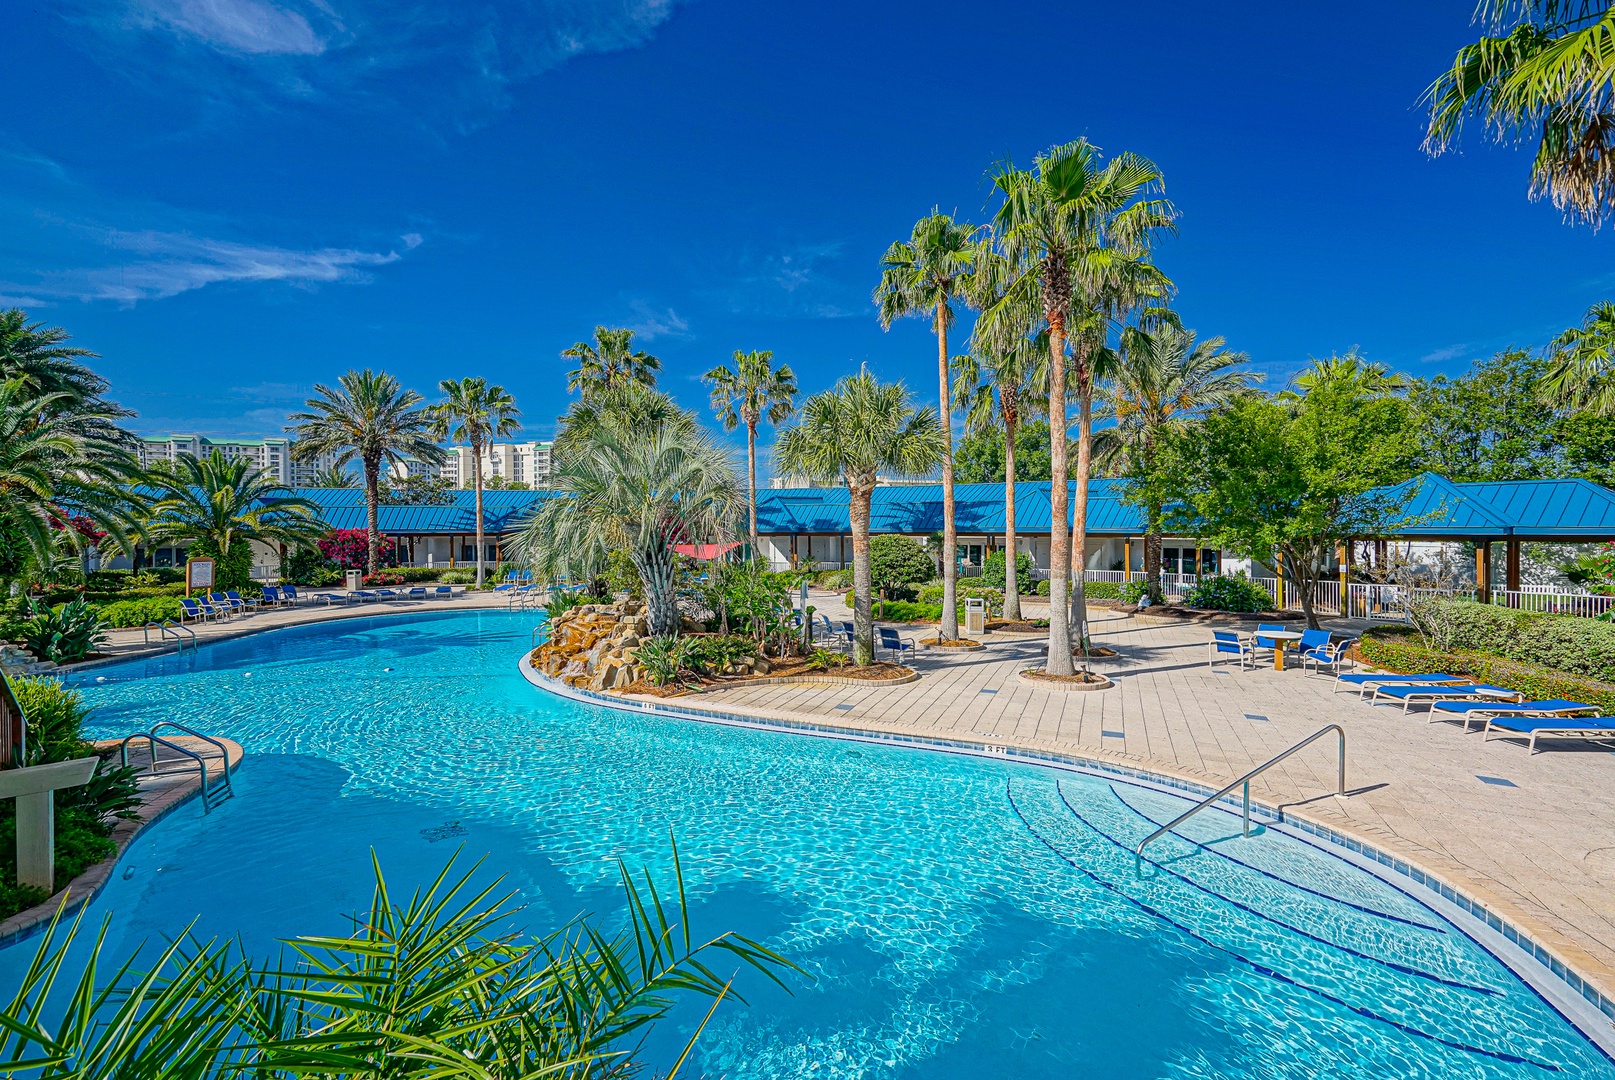 Make a splash or relax the day away at the sparkling communal pool